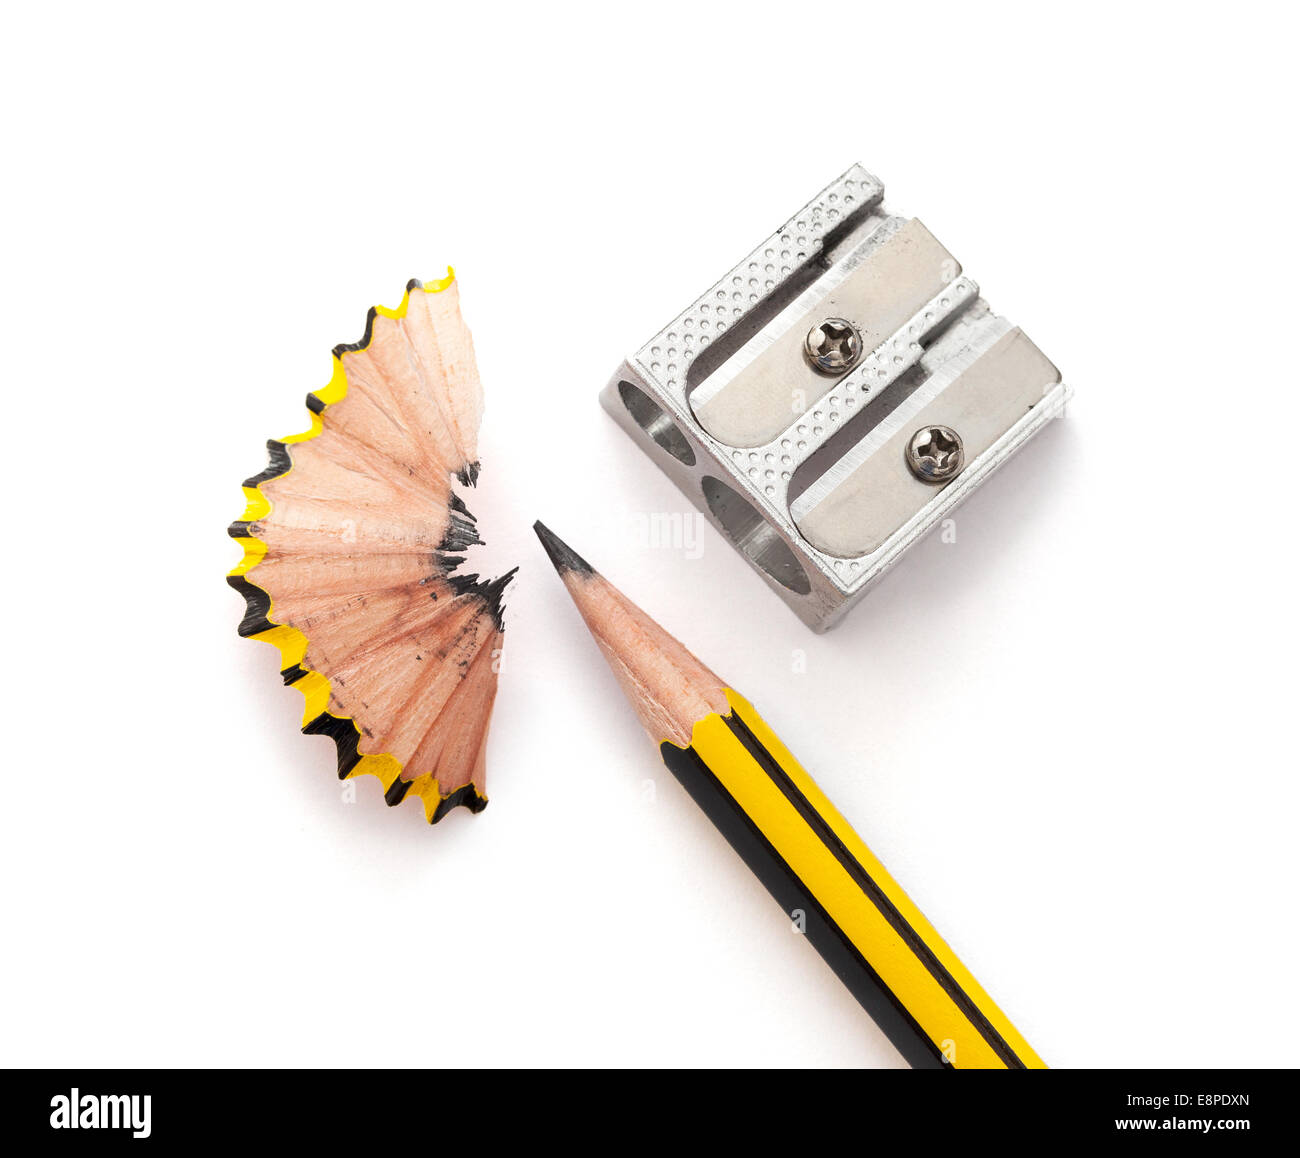 Pencil and pencil sharpener on white paper background Stock Photo